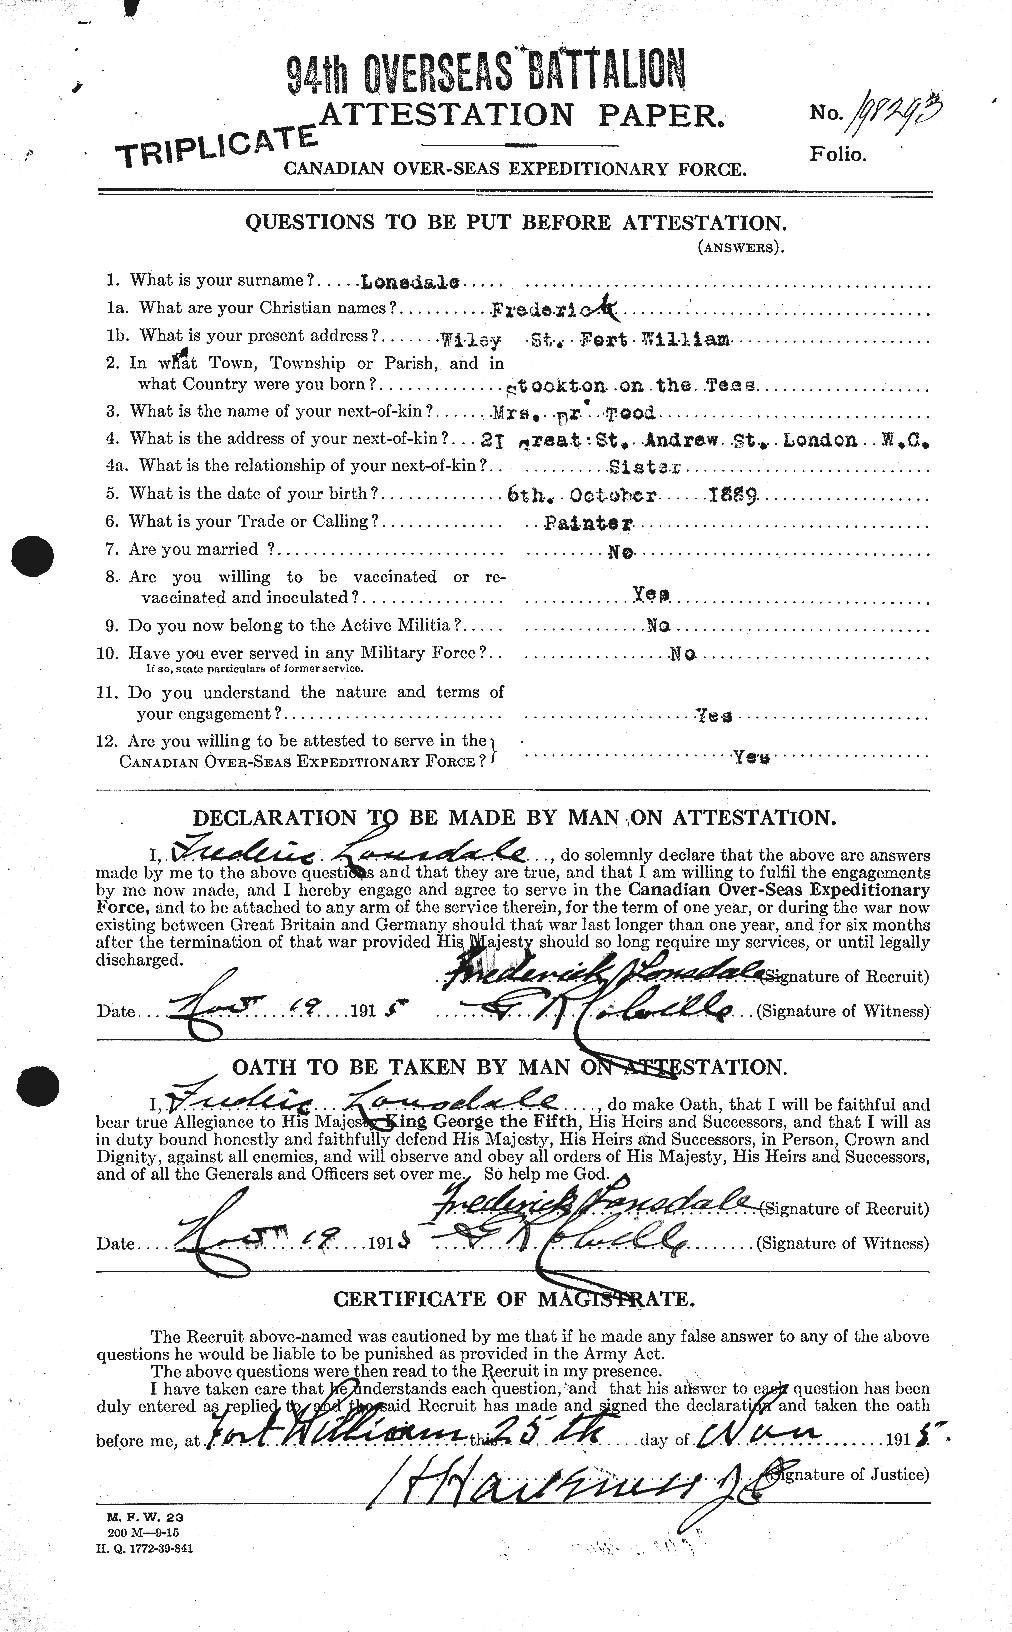 Personnel Records of the First World War - CEF 473584a